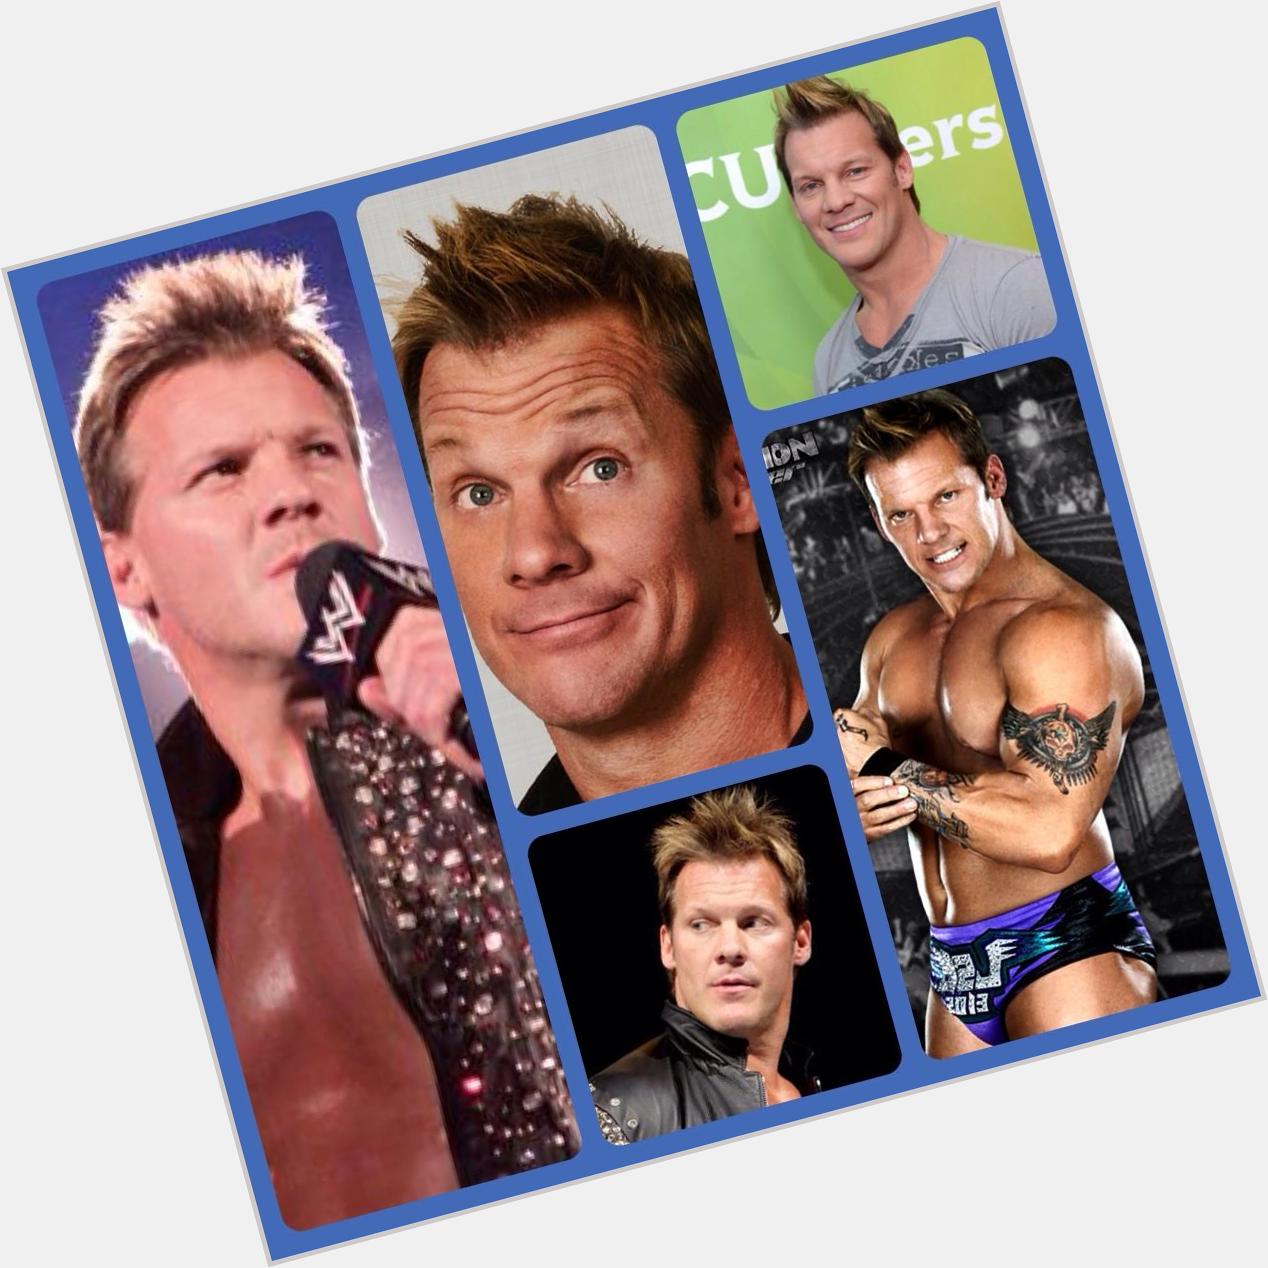 HAPPY Birthday Chris Jericho I hope you have a good day youre awesome !!!   